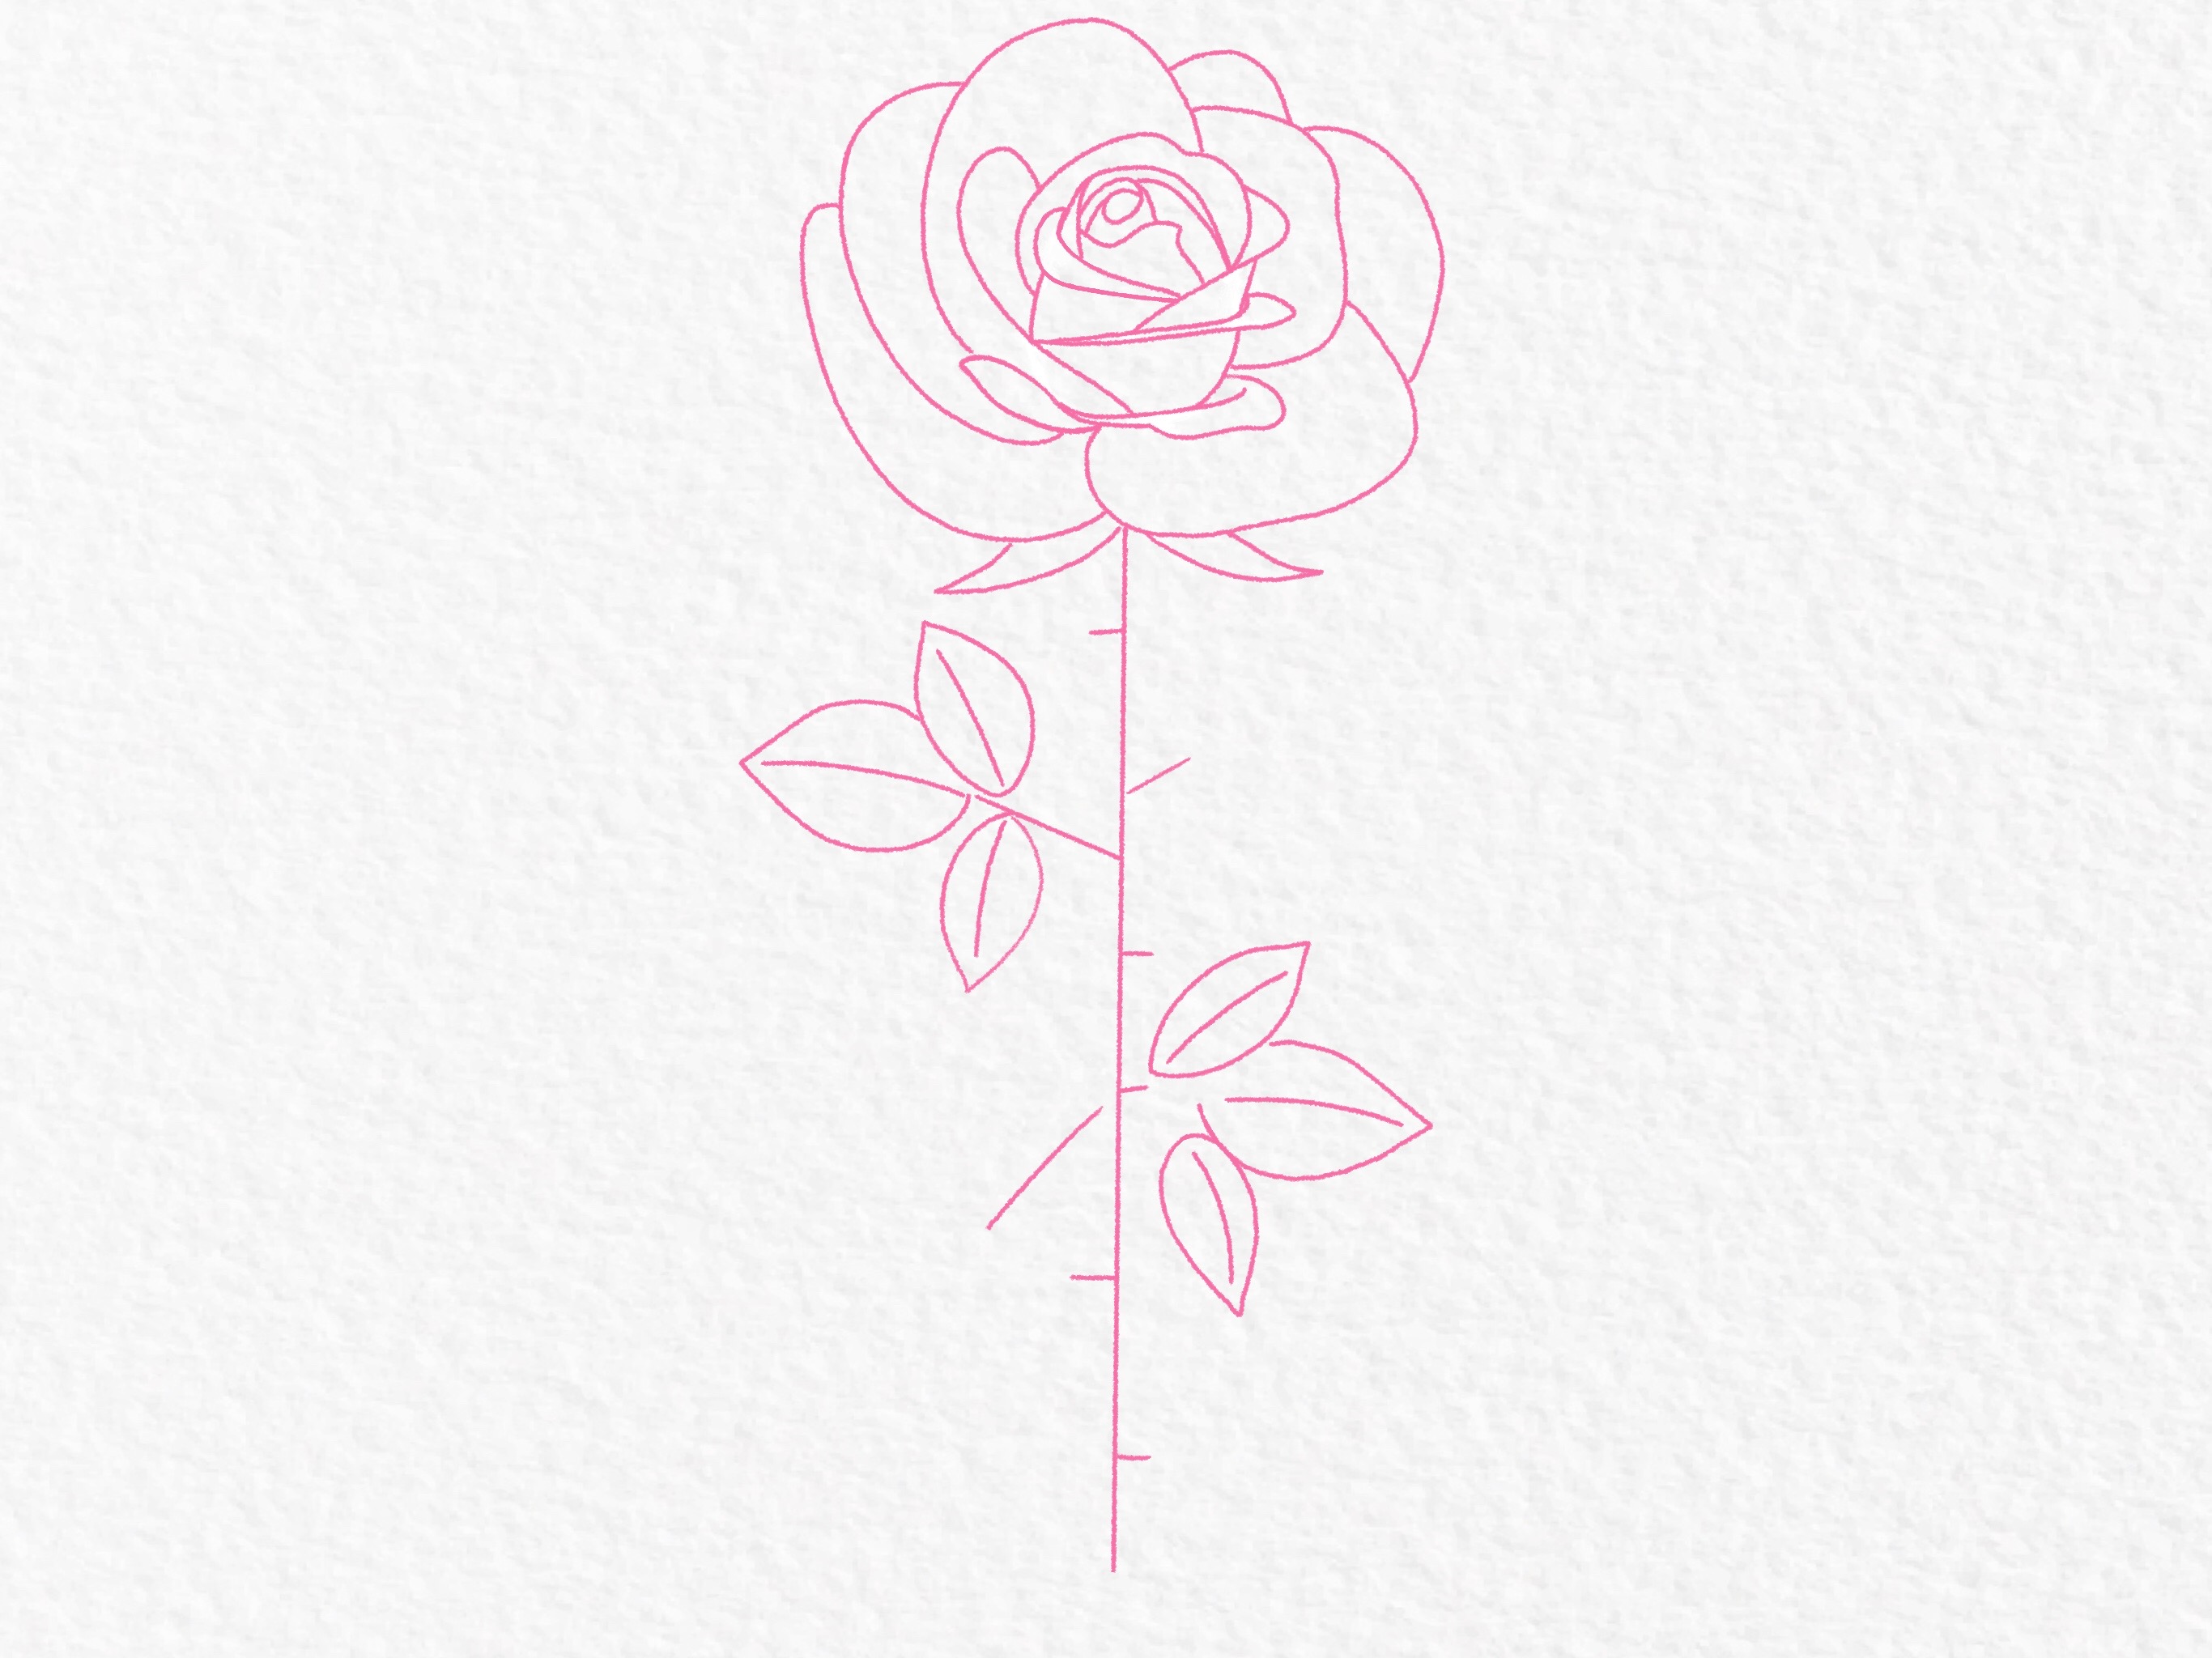 Simple Flower Drawing Ideas | How to Draw - Flower Drawings for Kids  🌼🌹💐🌷 | By Simple Drawings | Hello friends, welcome to our Facebook  page. You can teach your kids to